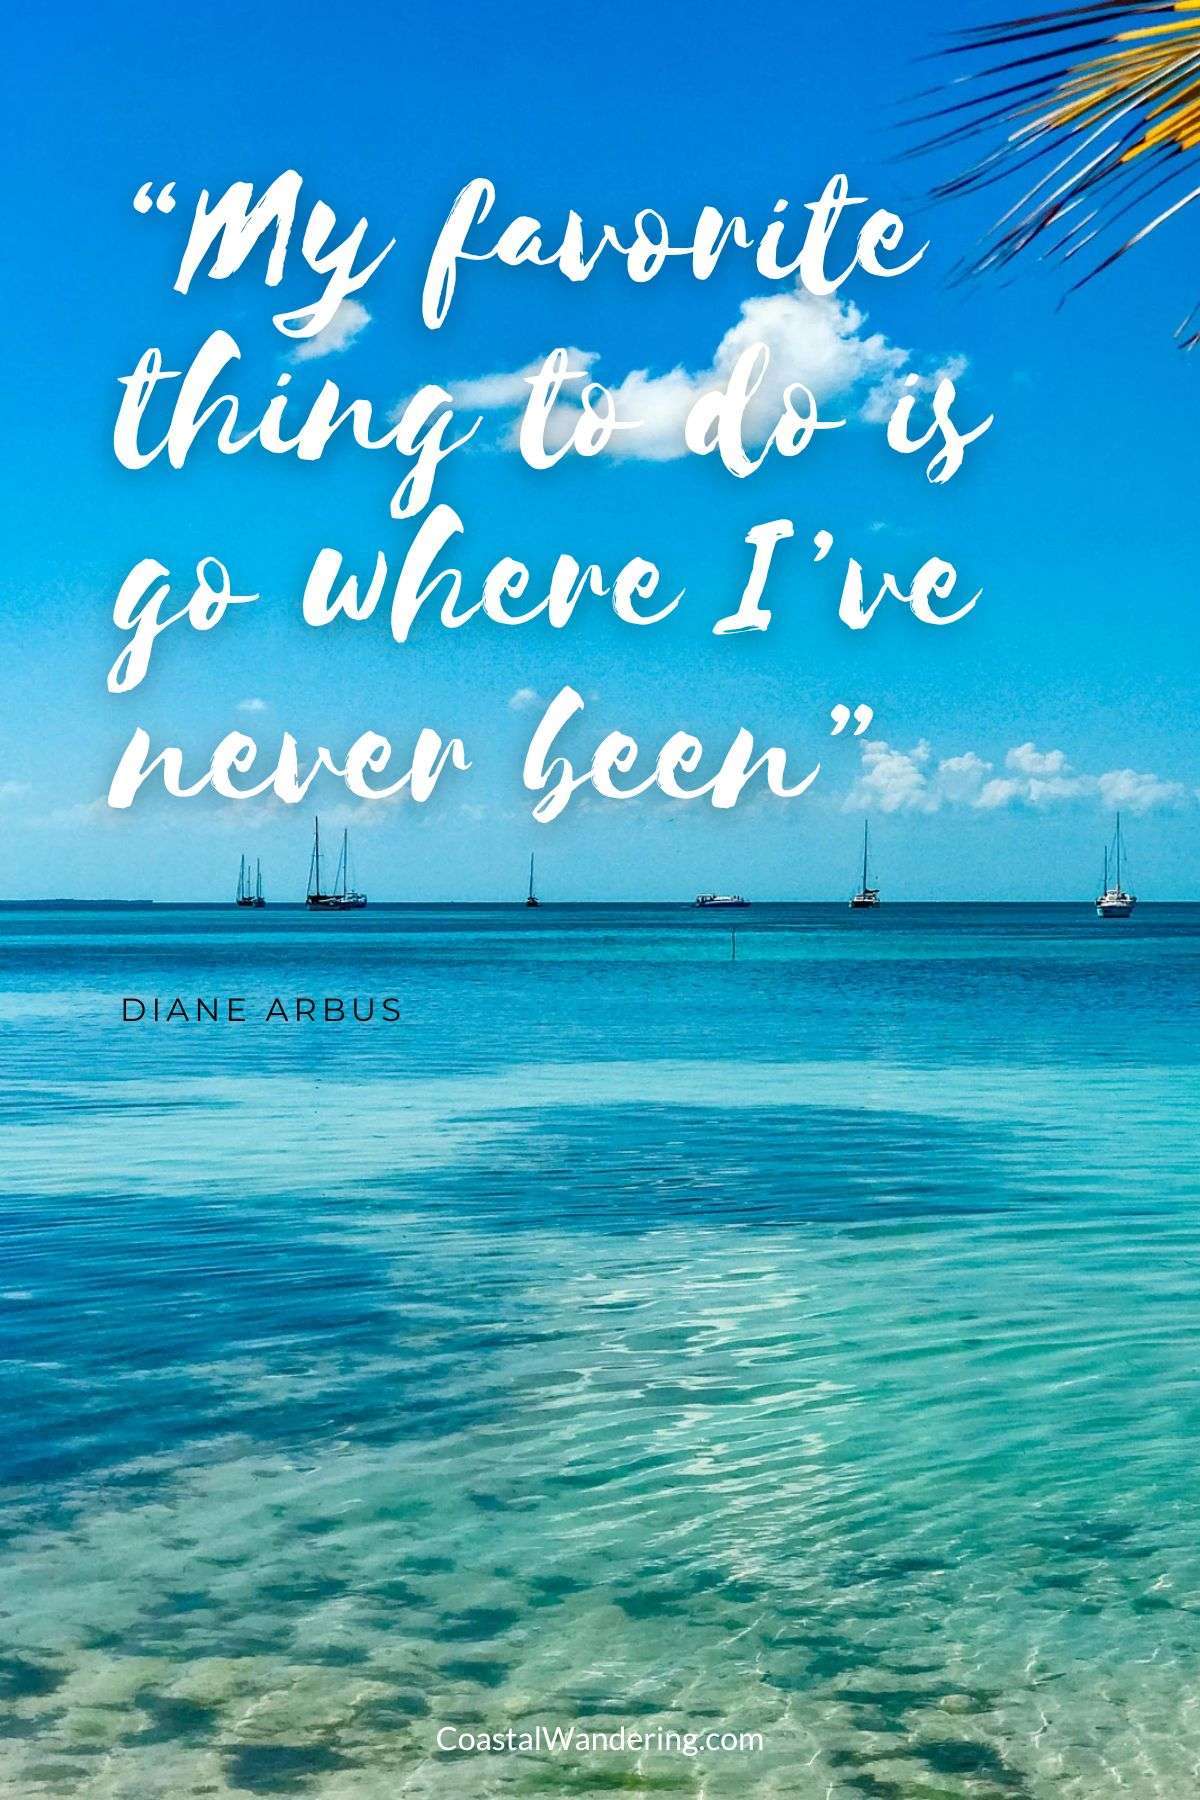 “My favorite thing to do is go where I’ve never been”  - Diane Arbus